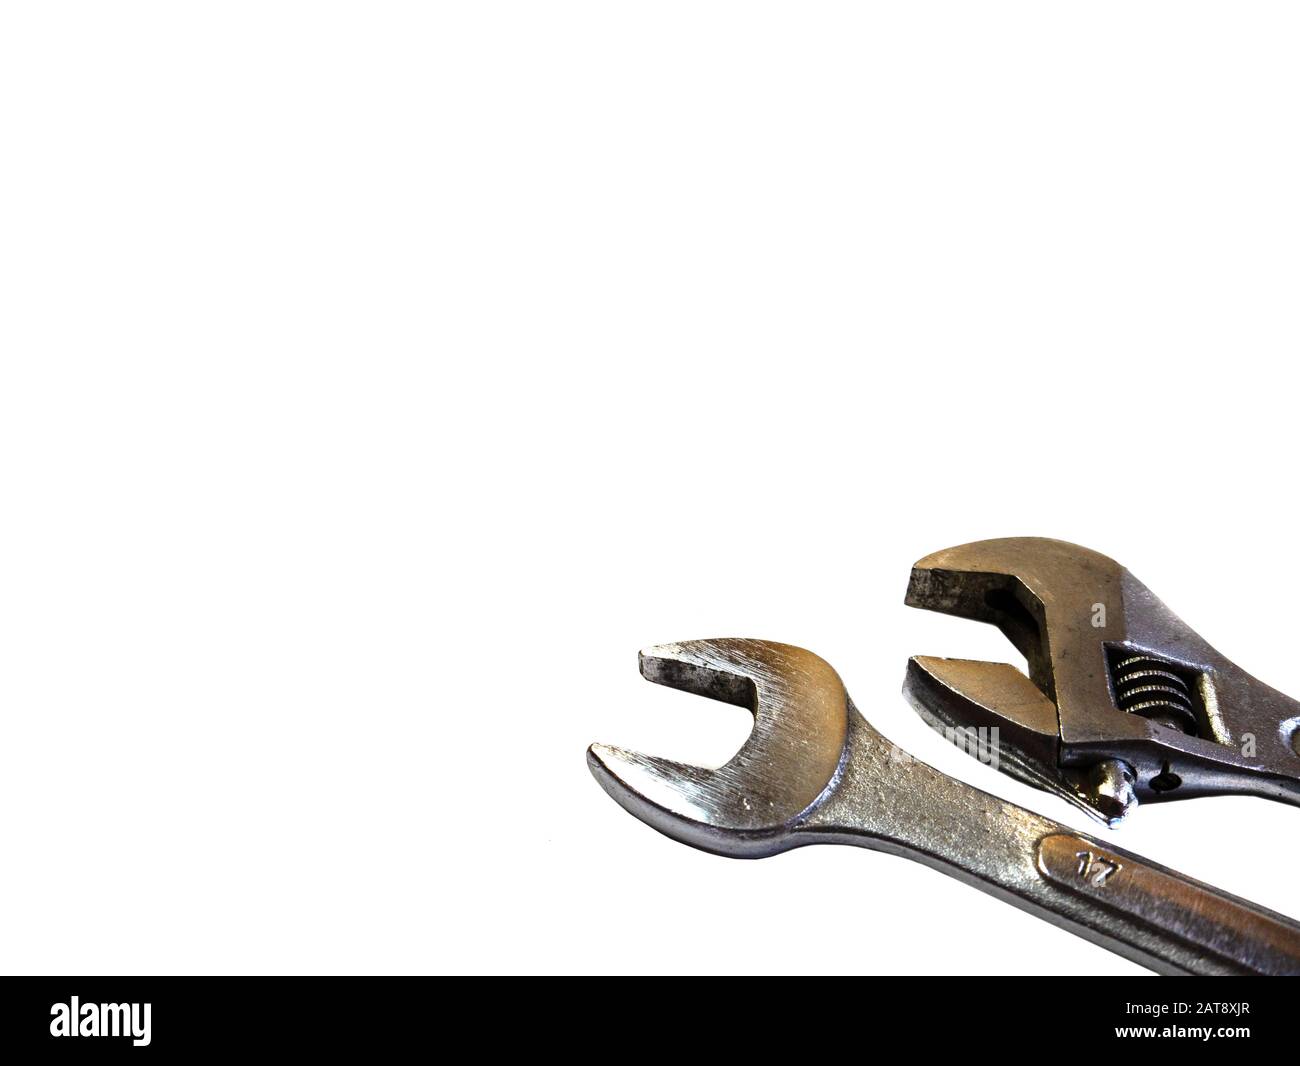 The wrench to repair. Tools for construction. Stock Photo